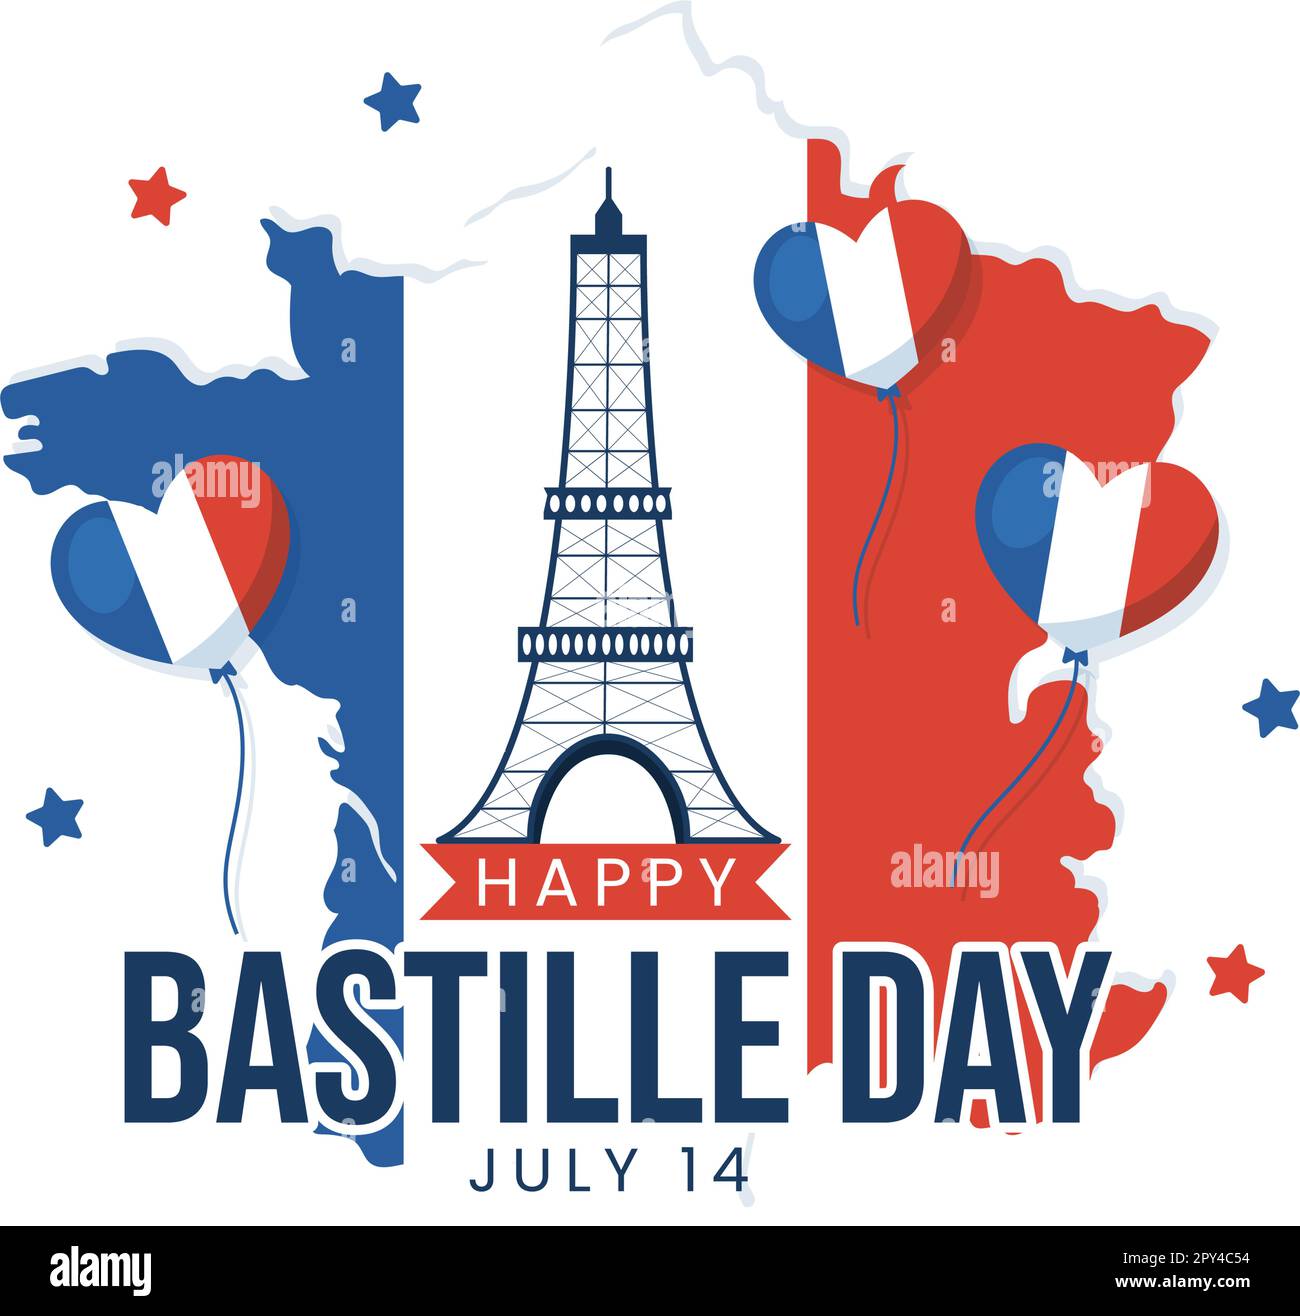 257 Bastille 3d Royalty-Free Images, Stock Photos & Pictures | Shutterstock